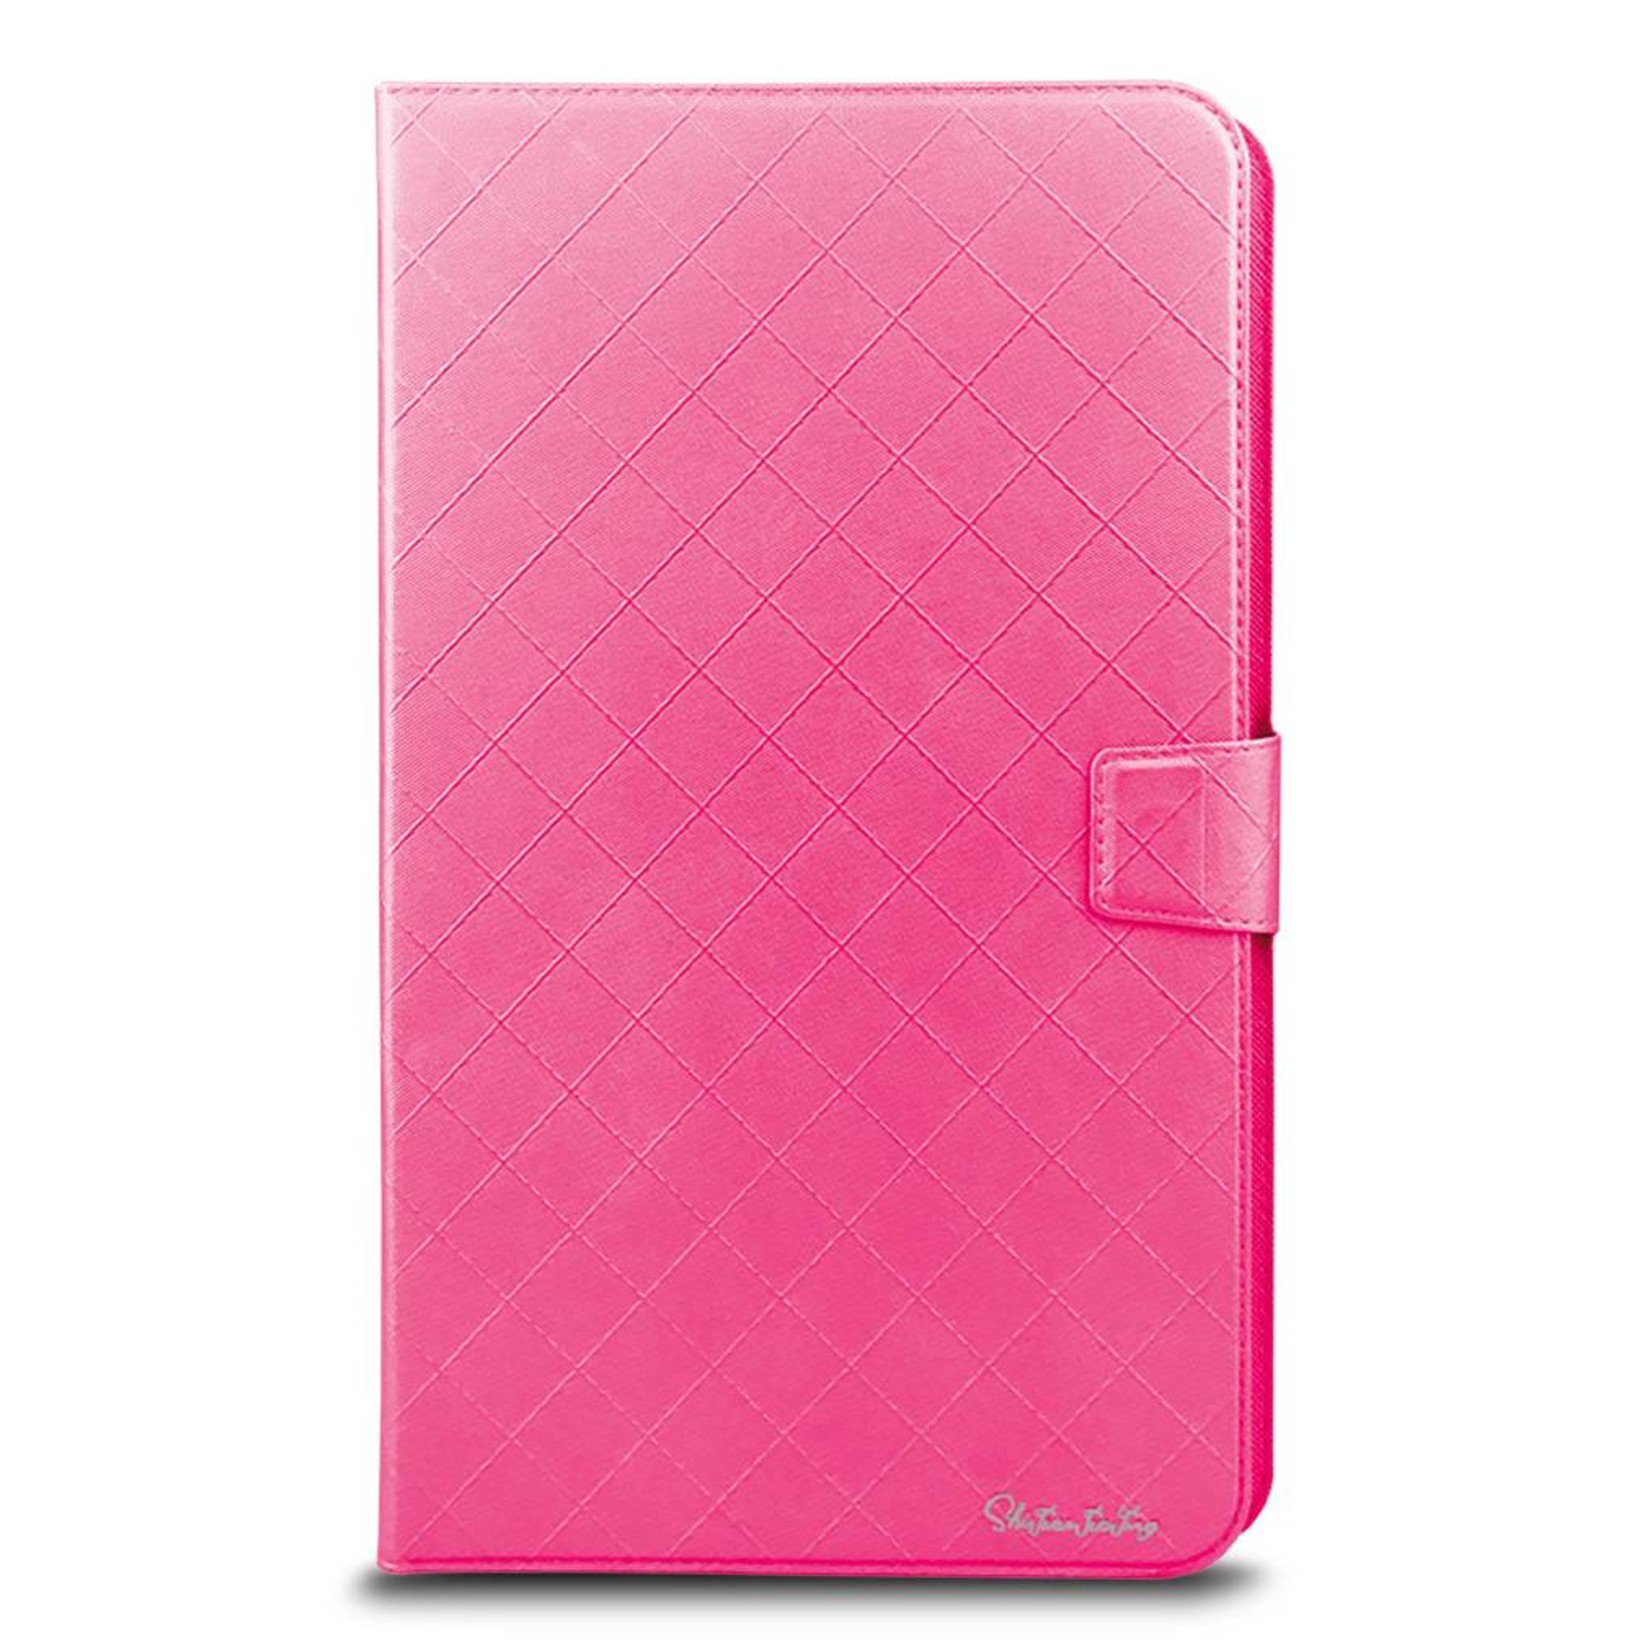 Universal 10 inch Tablet Diamond Pattern PU Leather Wallet Case with 2 Credit Card Slots